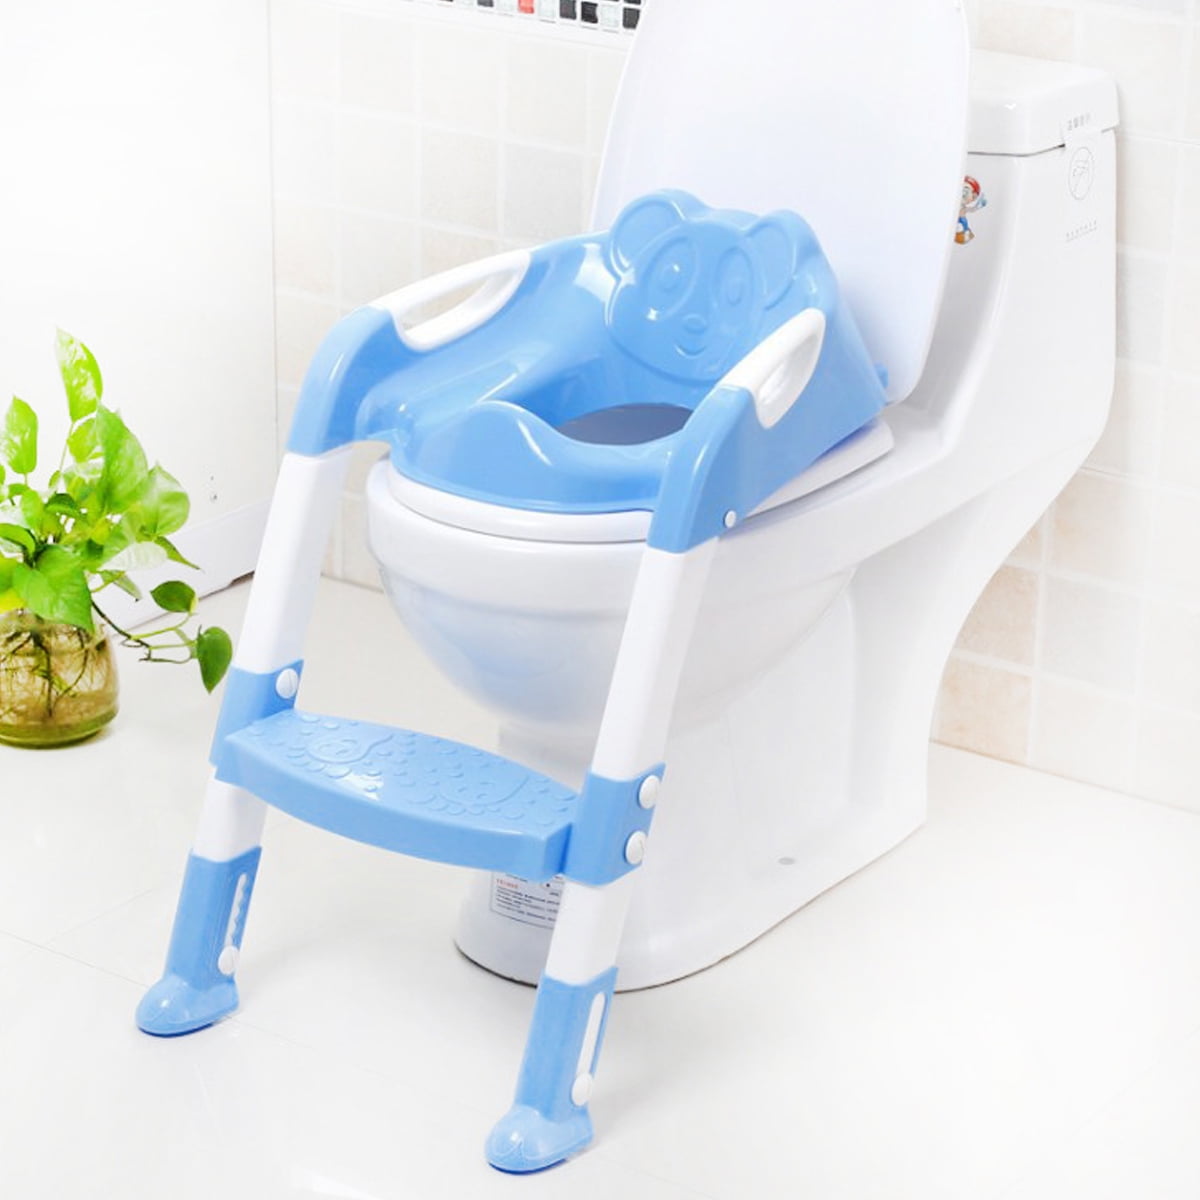 Purple Blue for Boys Potty Training Toilet Seat with Step Stool Ladder for Kid and Baby Safe Handles and Non-Slip Wide Steps Adjustable Toddler Toilet Training Seat with Soft Anti-Cold Padded Seat 